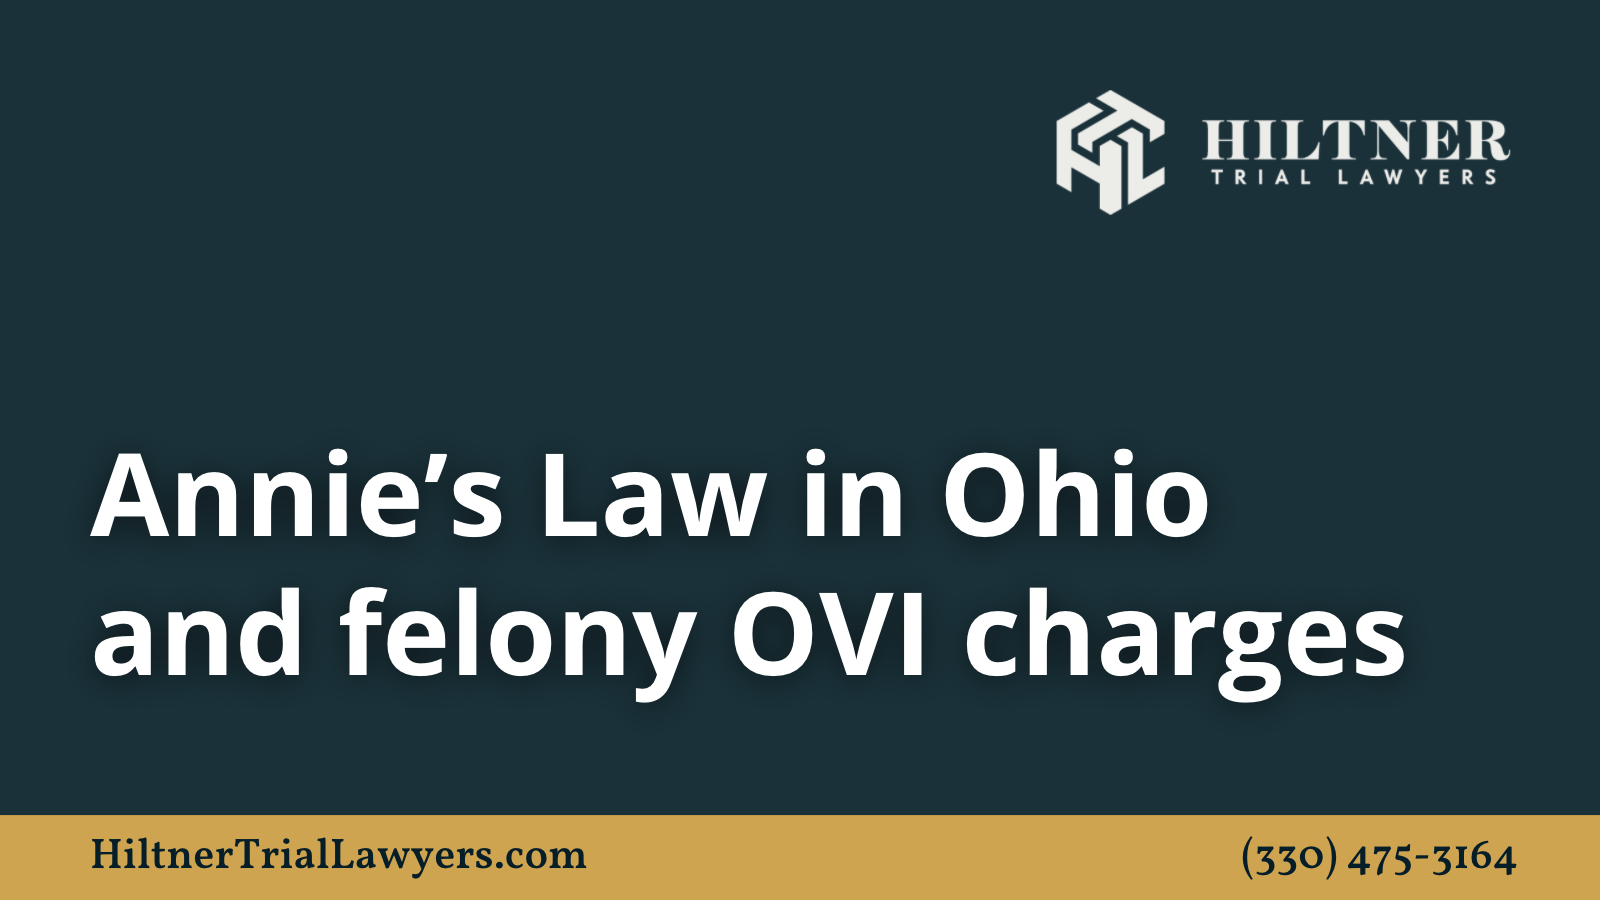 Annie’s Law in Ohio and felony OVI charges - Hiltner Trial Lawyers Ohio - max hiltner